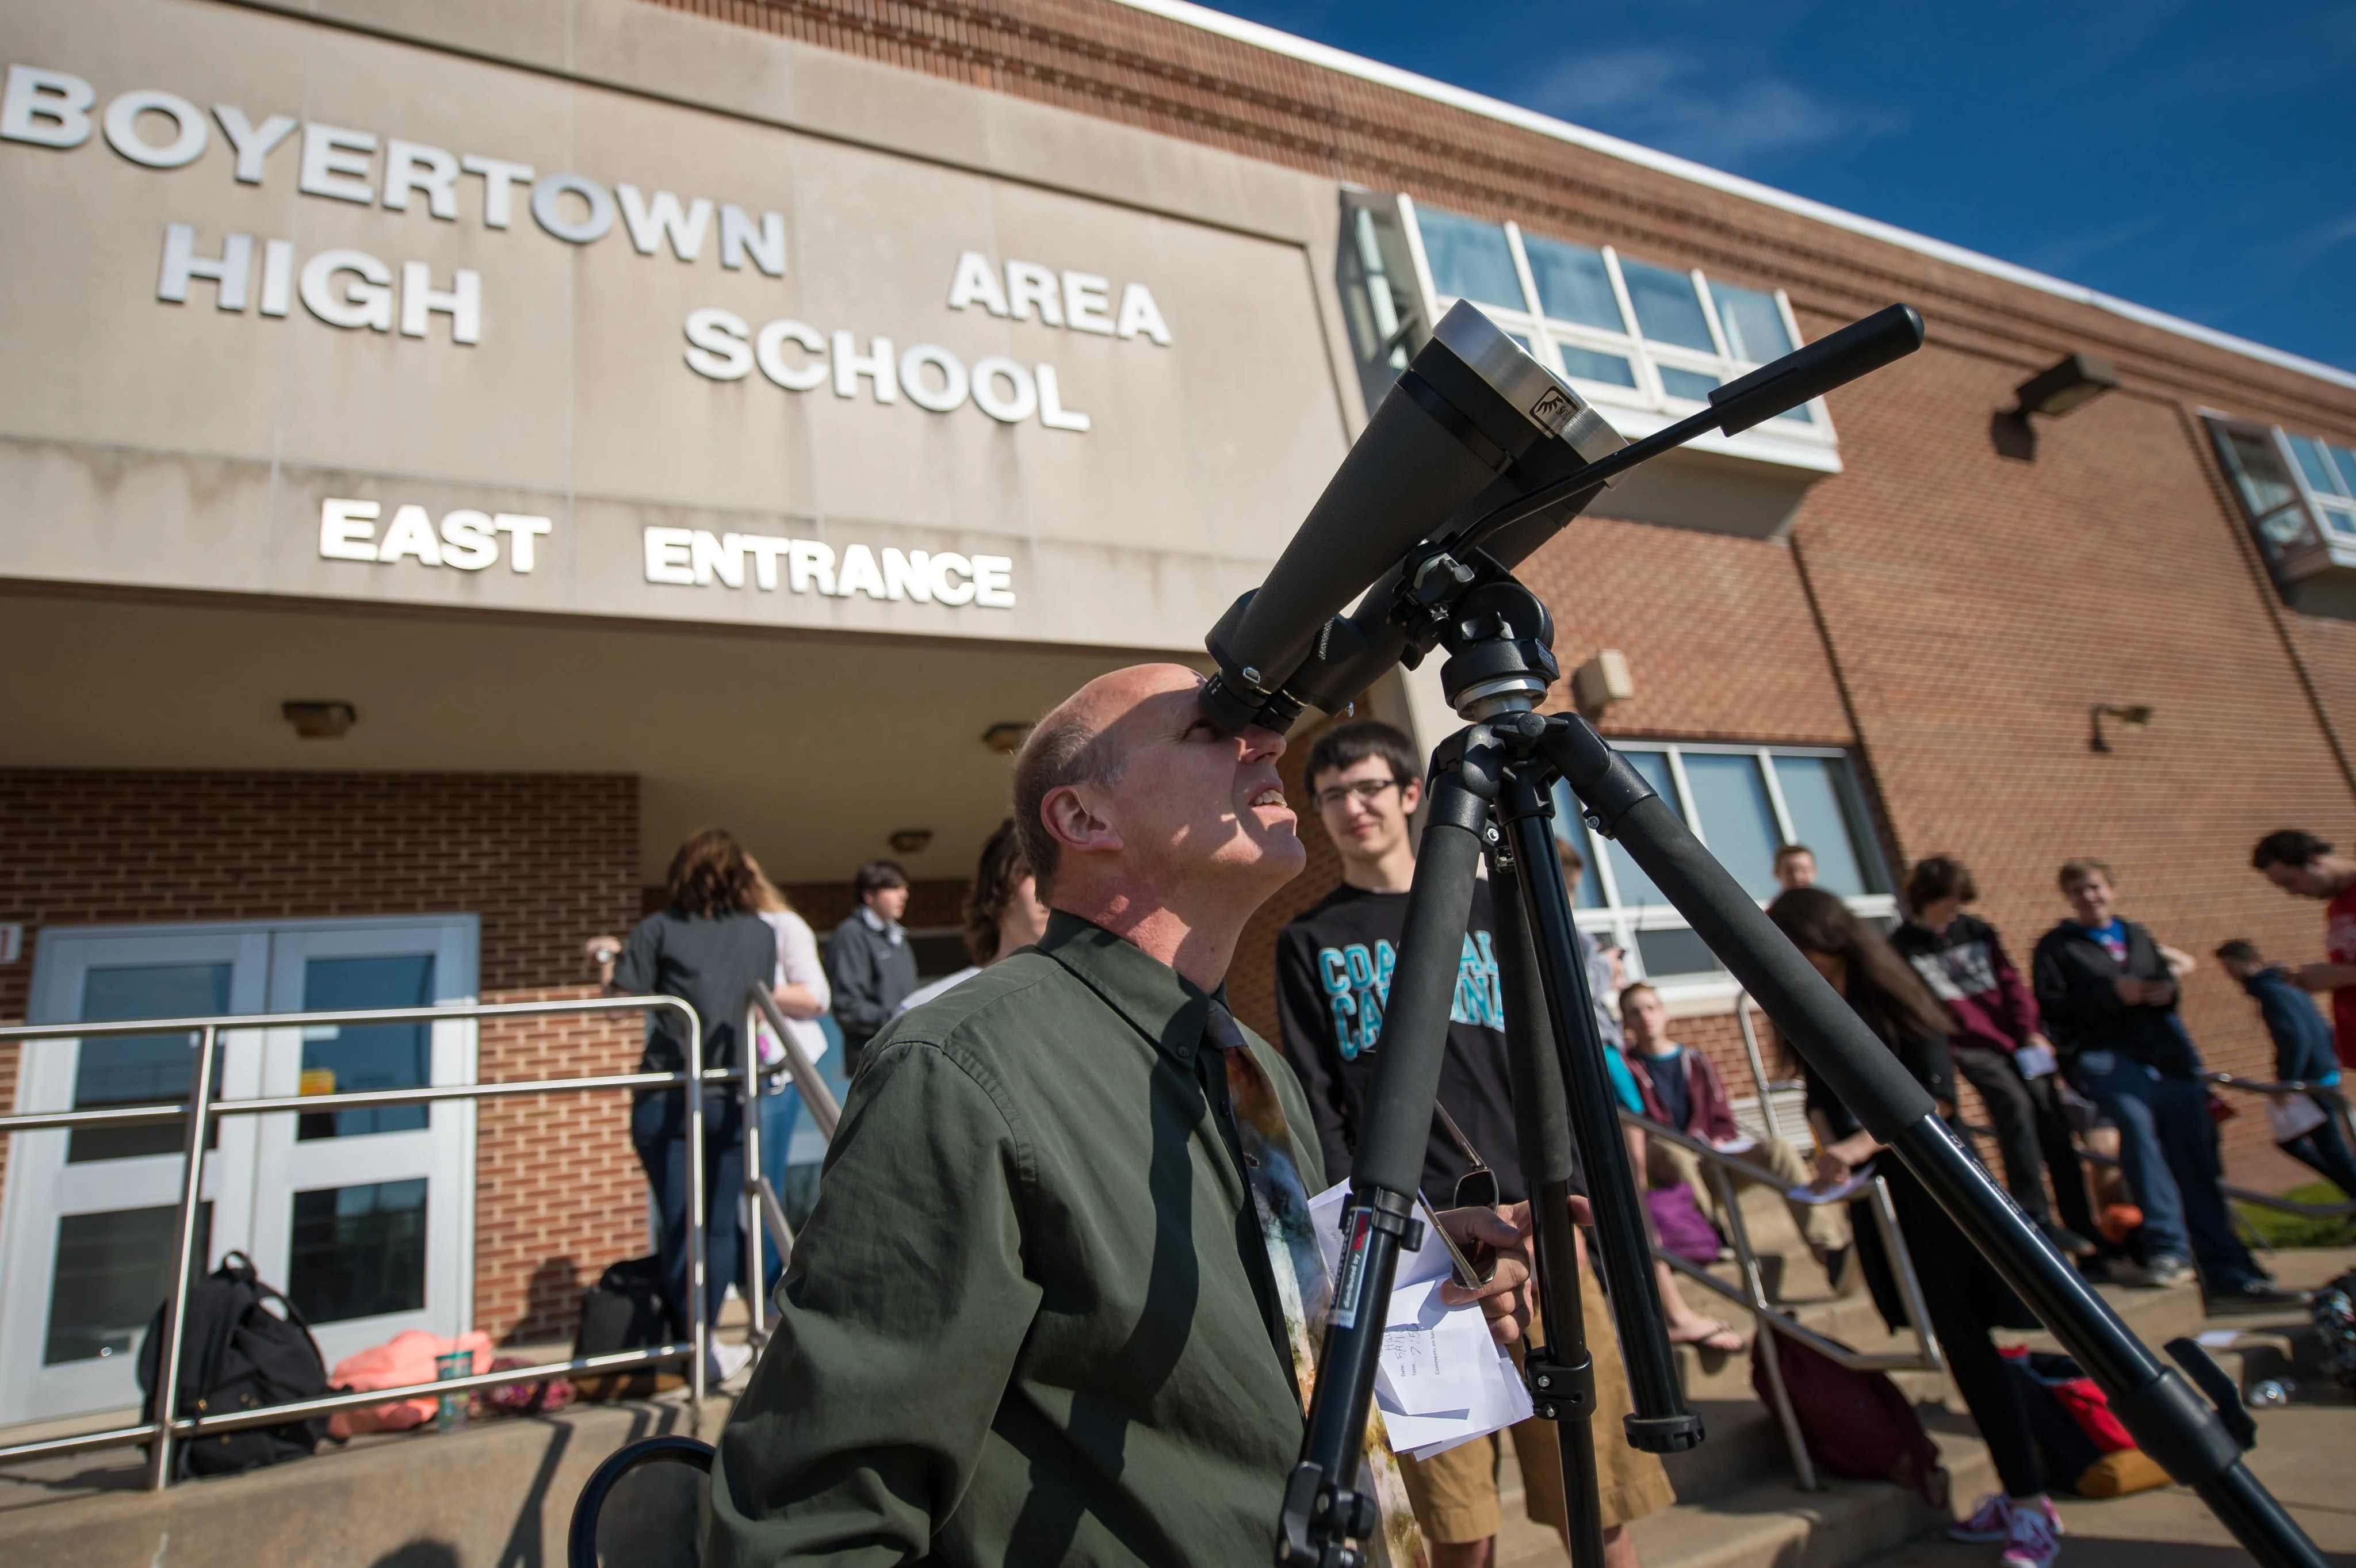 Outside a high school building, an adult man looks at the Sun through binoculars outfitted with a solar filter for safe viewing. About a dozen students are visible in the background.